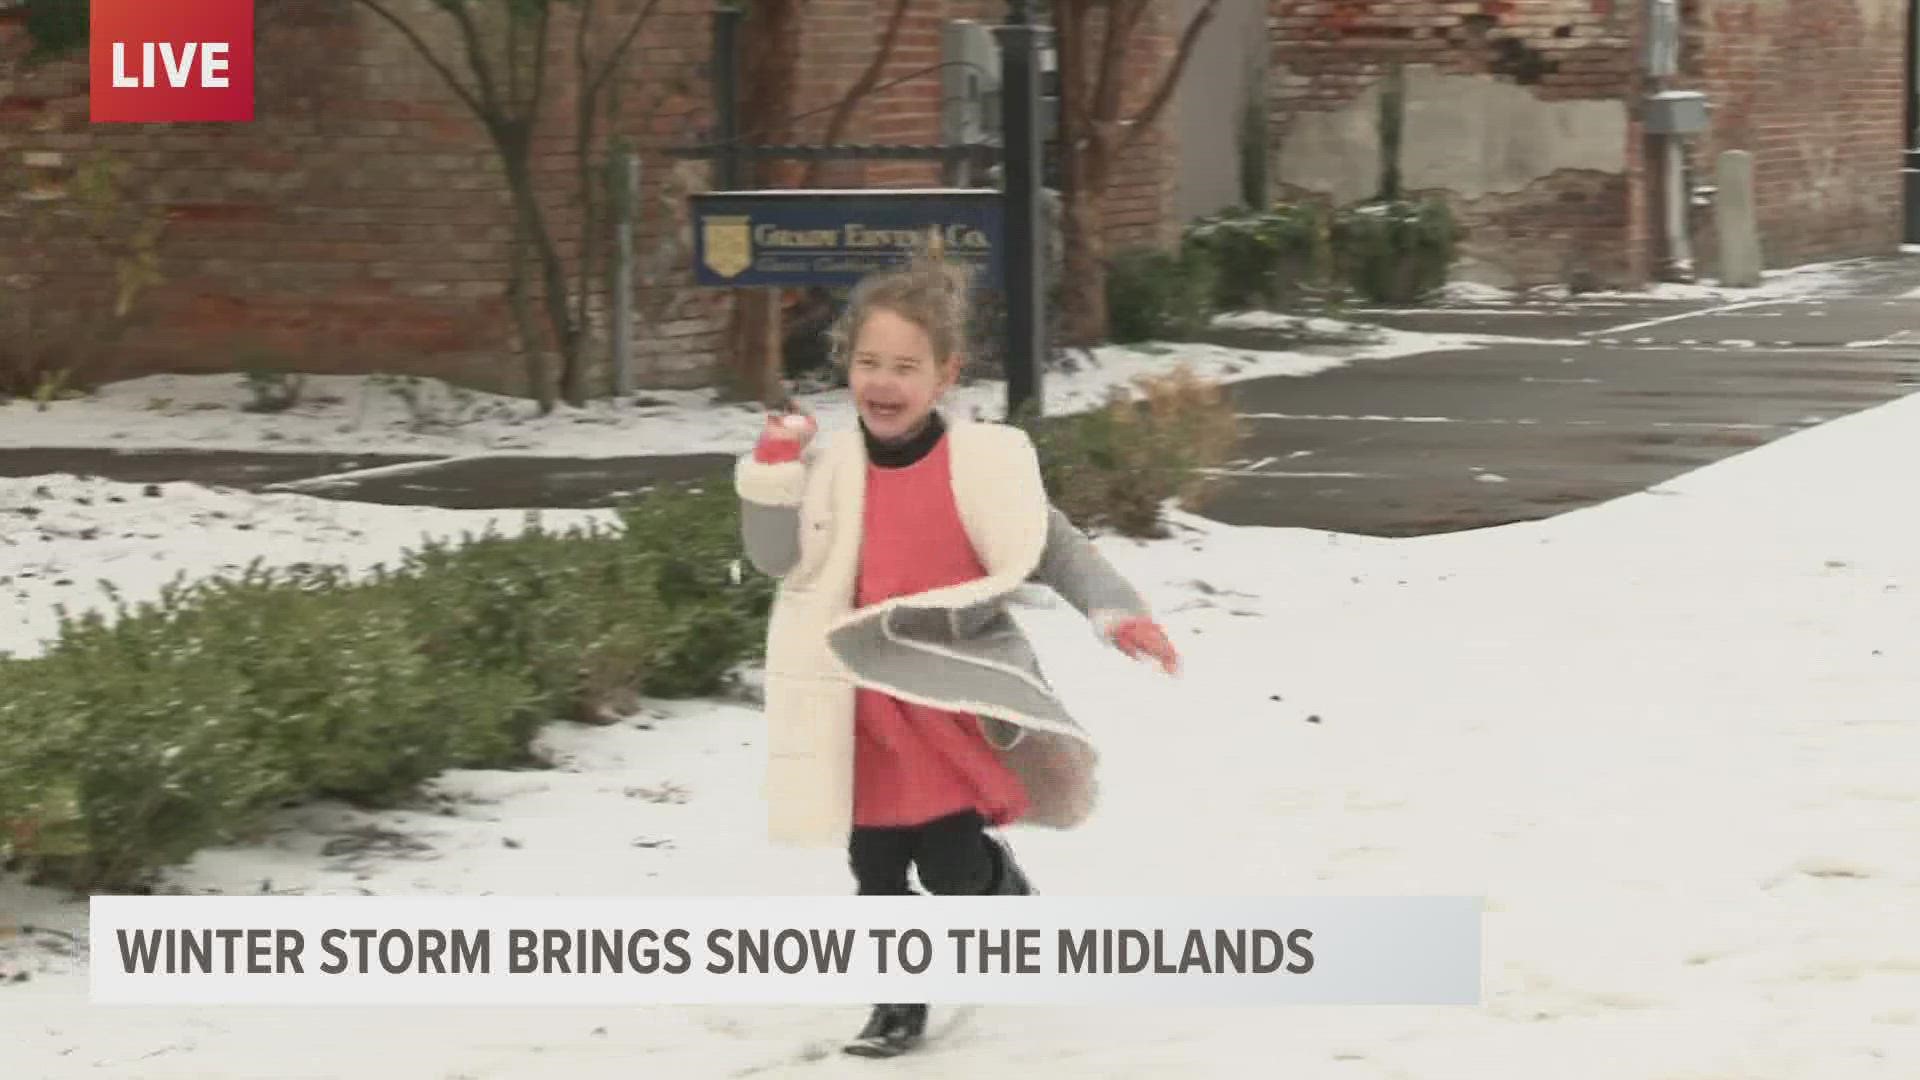 For one little girl, the snow was a chance to have a snowball fight with her dad.